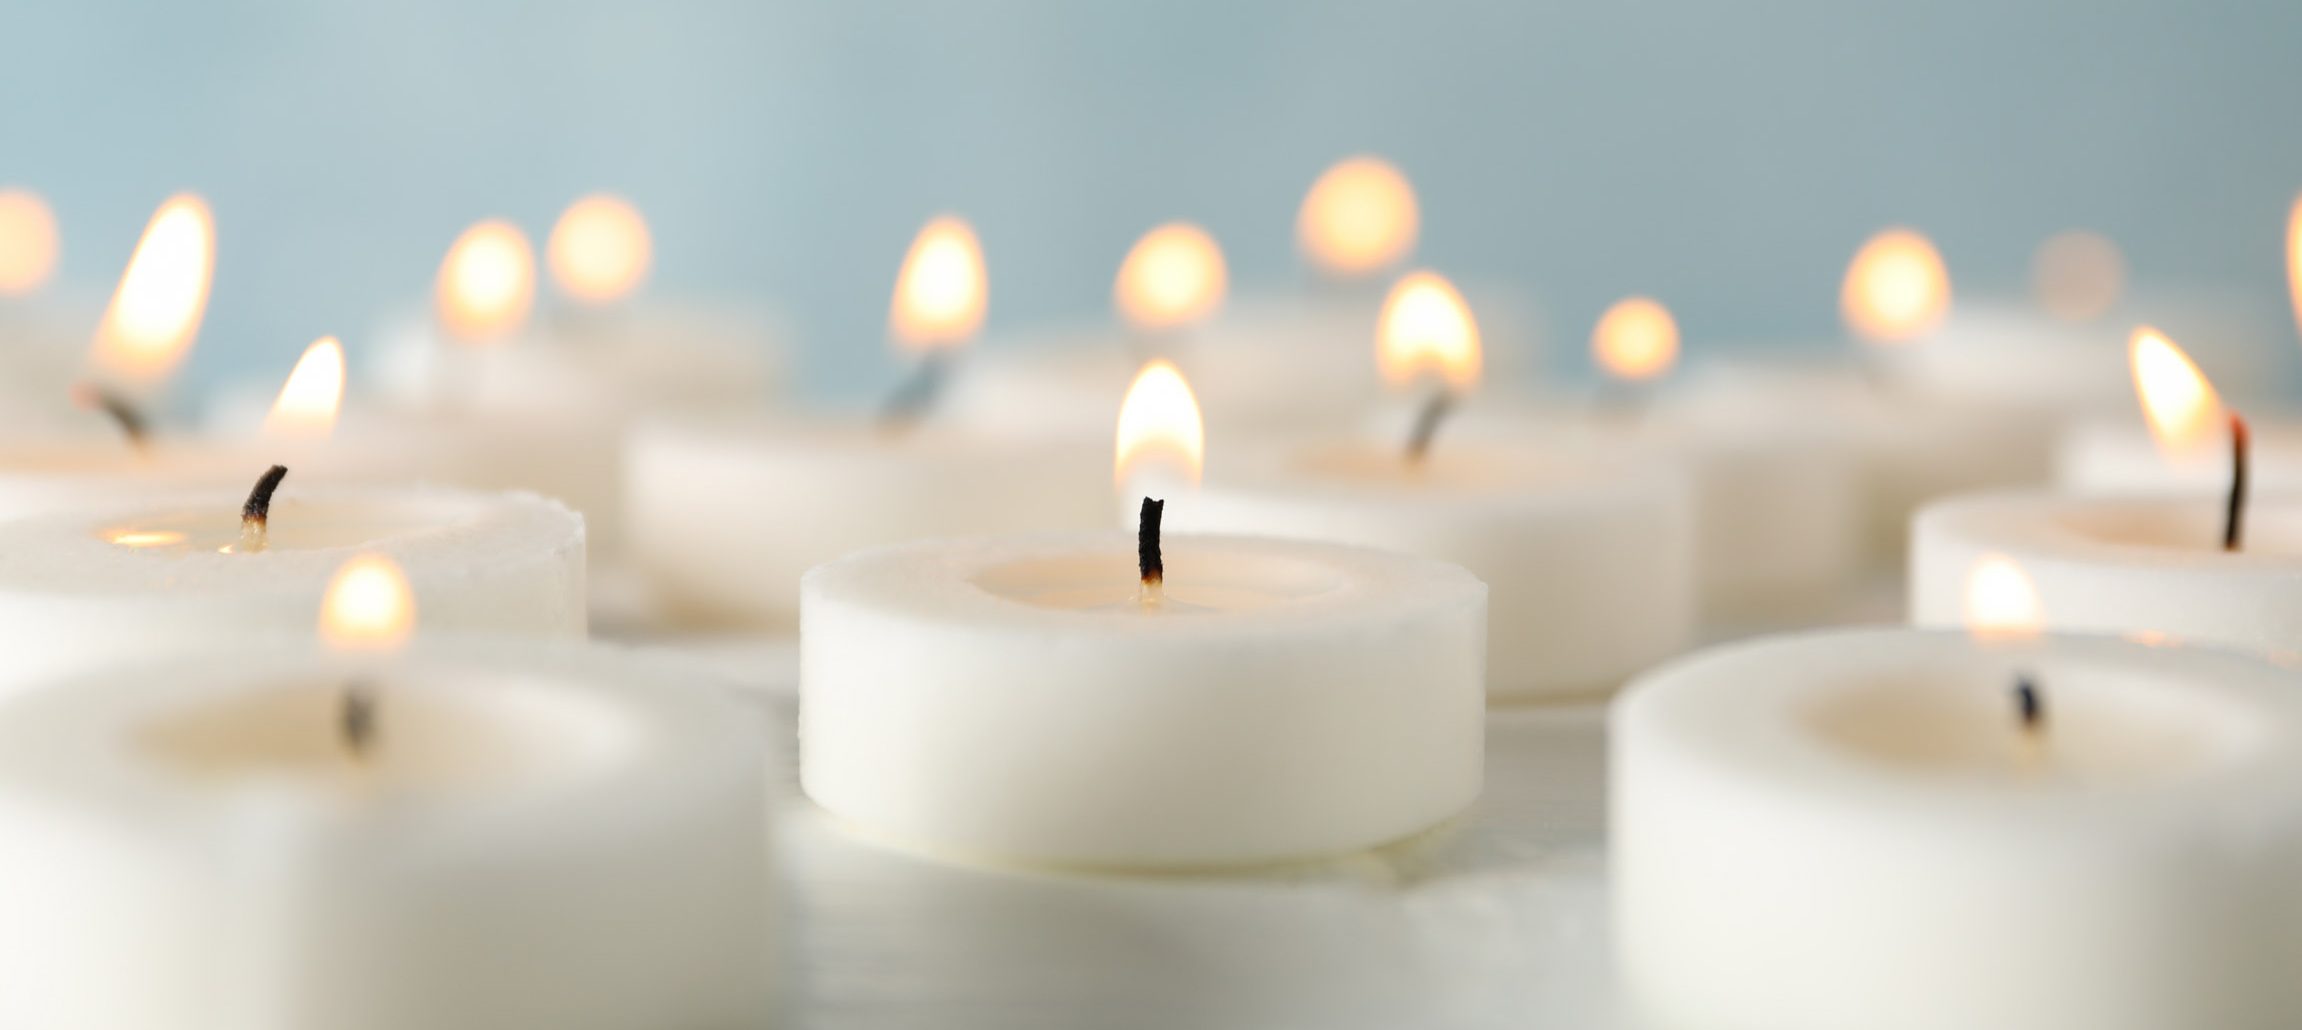 Candle Wallpapers  TrumpWallpapers